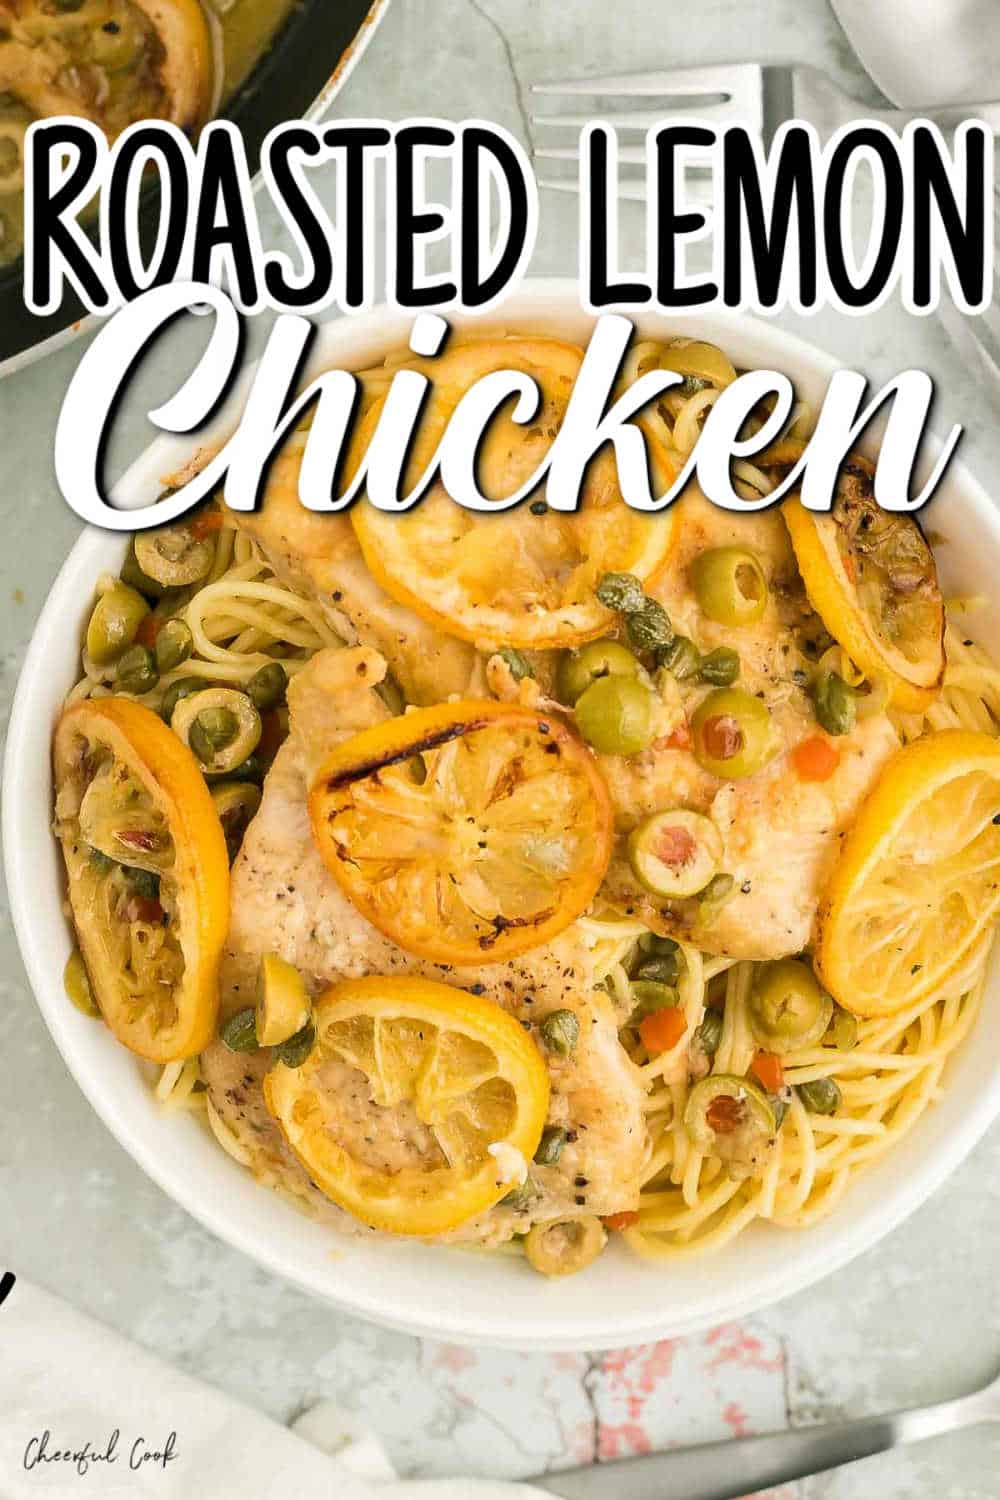 Lightly crusted, tender, pan fried chicken in a caper and olive butter sauce topped with roasted slices of lemon. Impressive, easy to make, and incredibly delicious. #cheerfulcook #lemonchicken #recipe #pasta #butter via @cheerfulcook